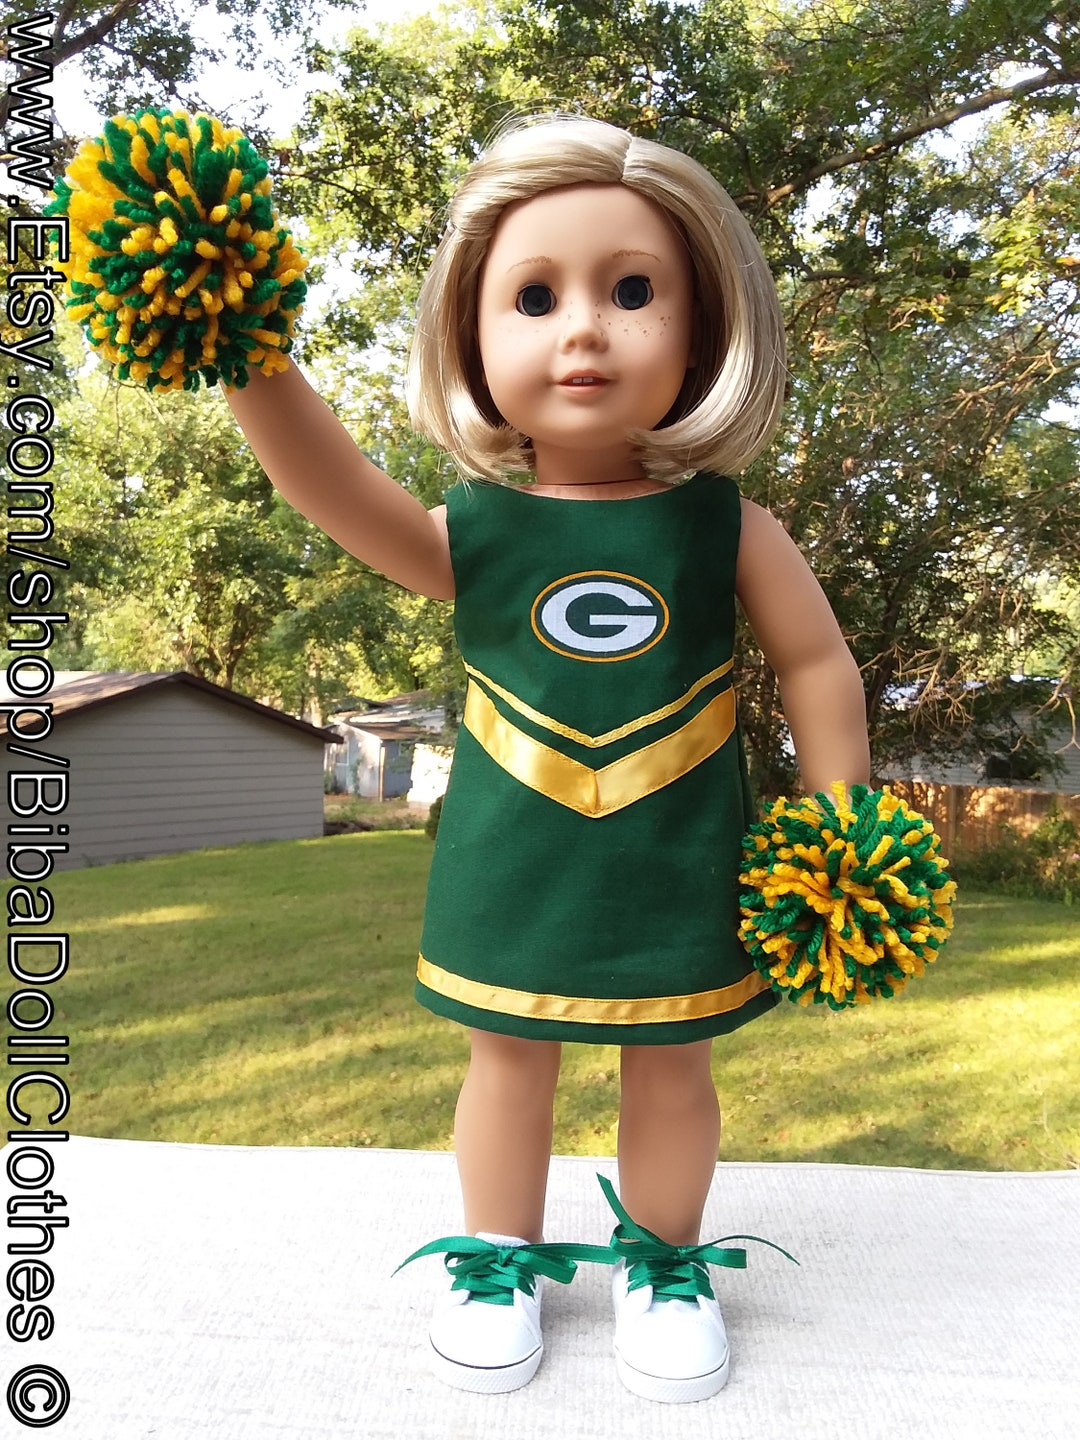 2 Green and Gold Pom Poms [sop-11-green-gold] - $3.25 : Doll Clothes Store,  Clothes for 18 Dolls